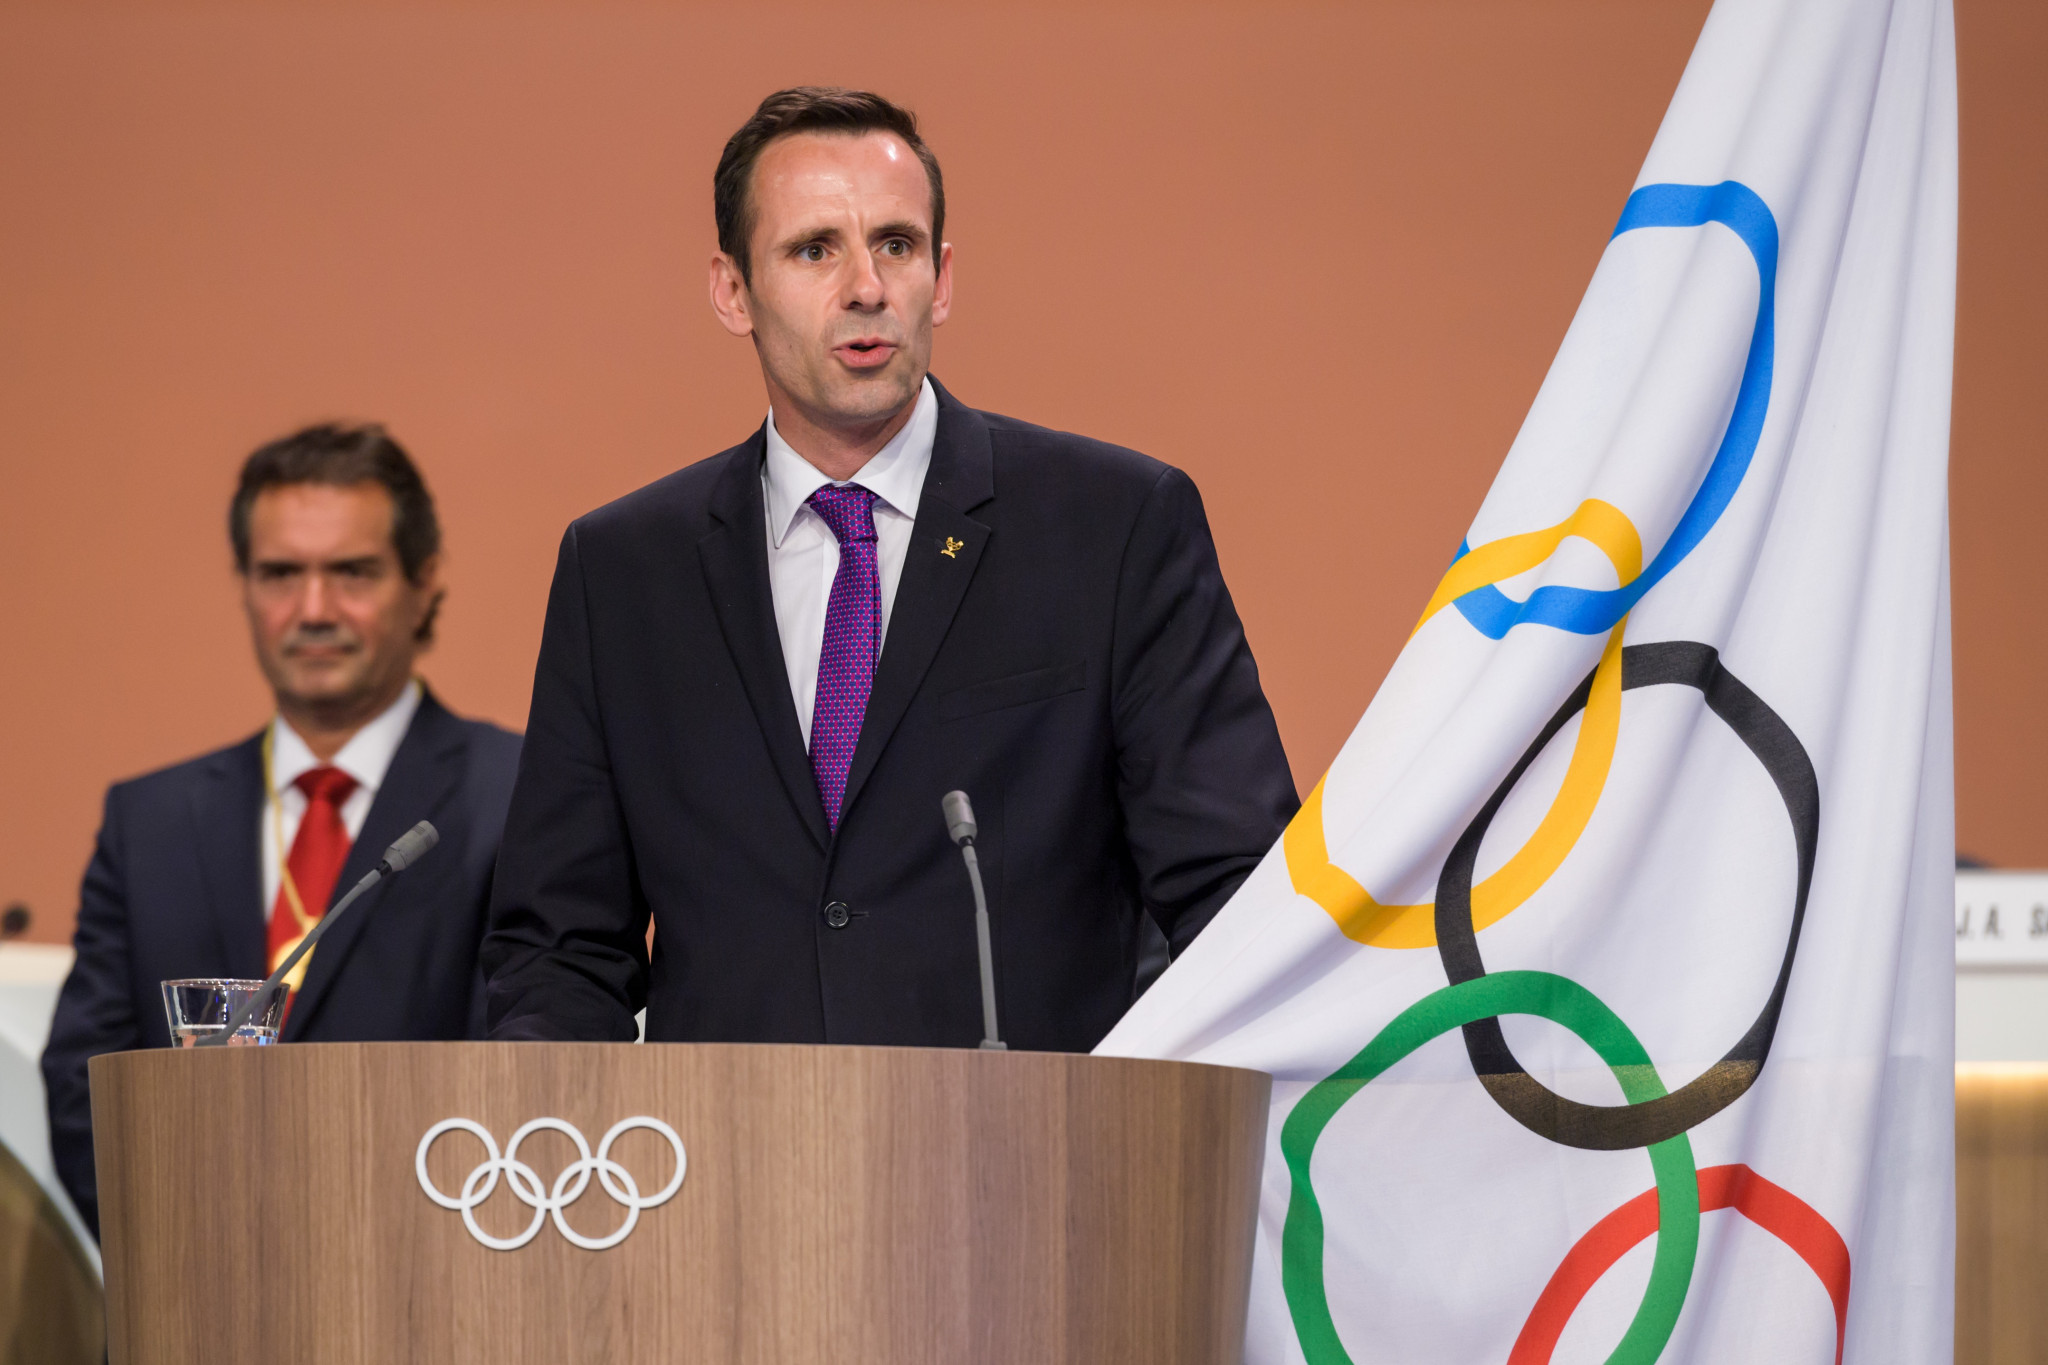 International Rowing Federation President Jean-Christophe Rolland has only been an IOC member since last year ©Getty Images